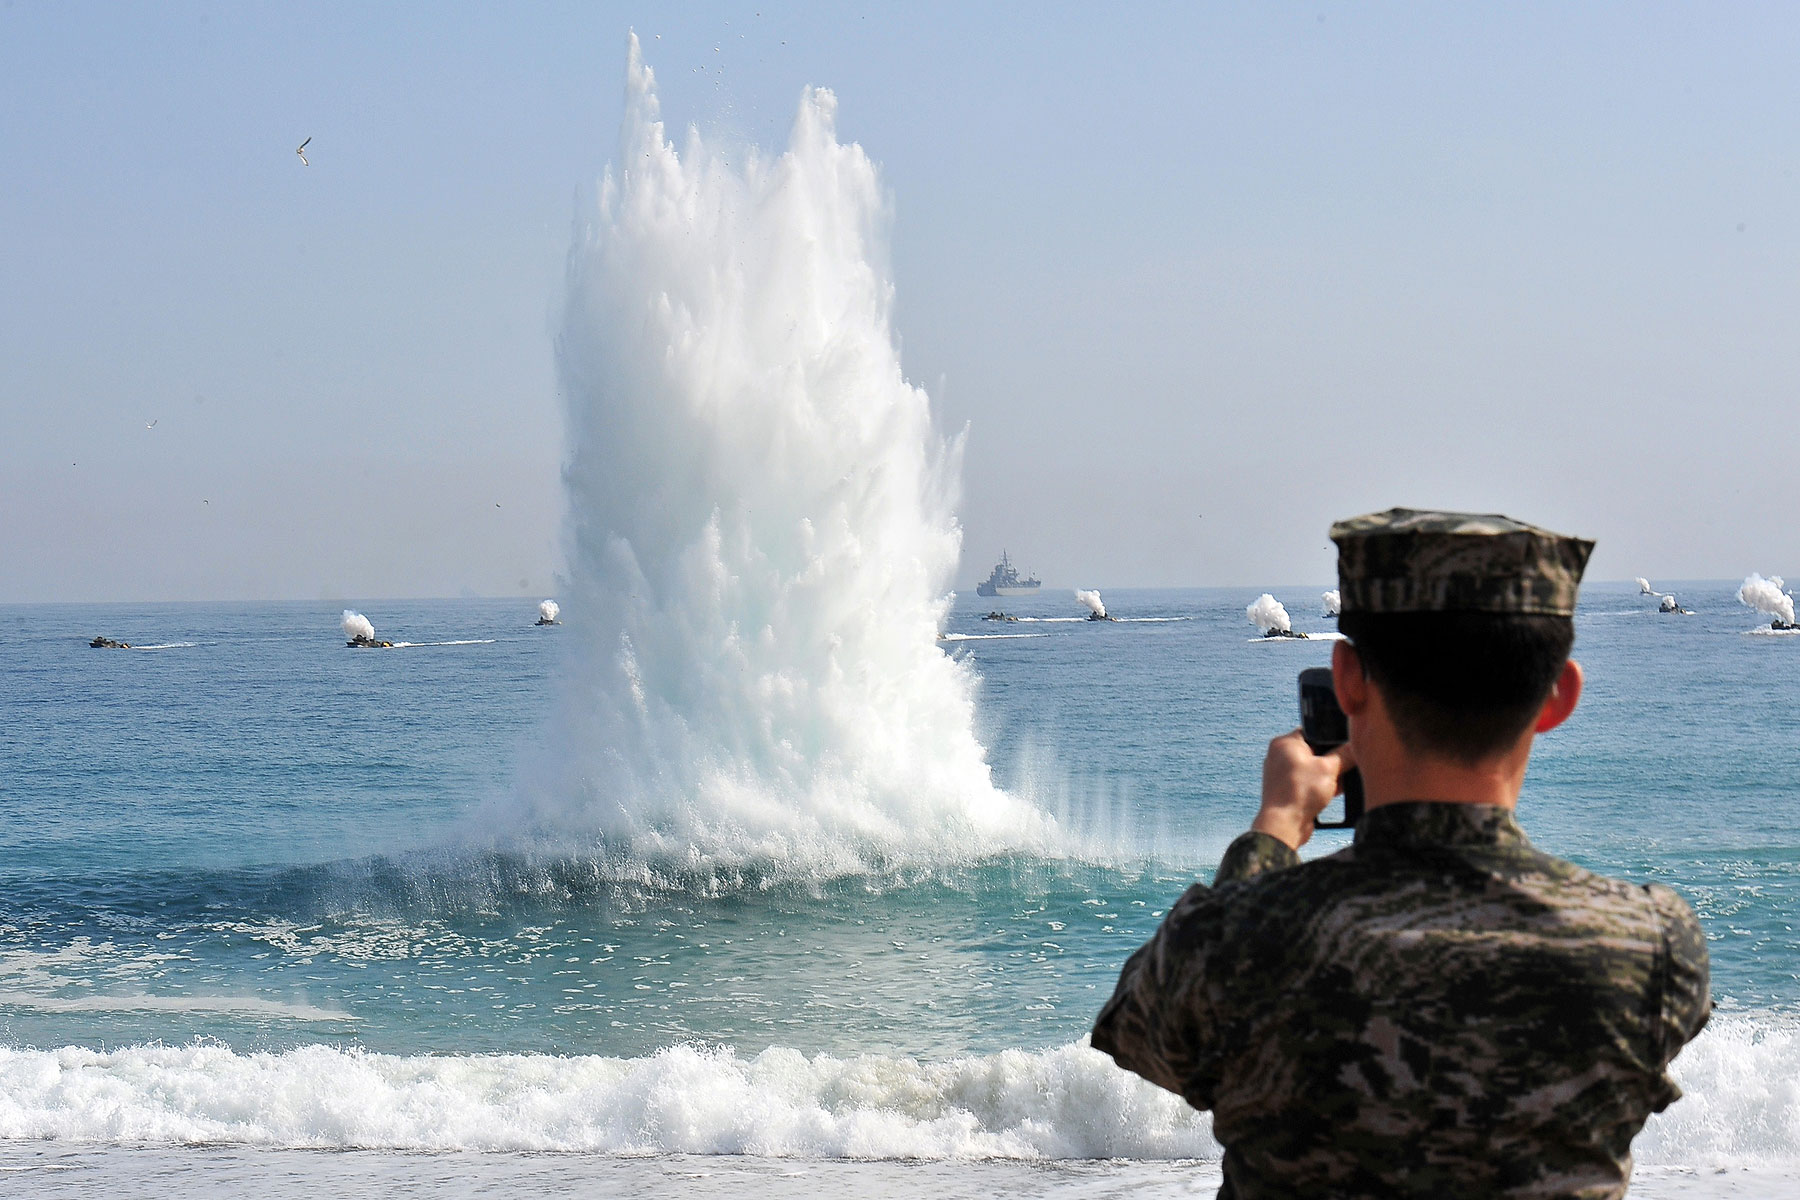 A South Korean Marine stands on a beach as amphibious assault vehicles (in background) approach the seashore during a joint landing operation by US and South Korean Marines in Pohang, 270 kms southeast of Seoul, on March 31, 2014 (JUNG YEON-JE—AFP/Getty Images)